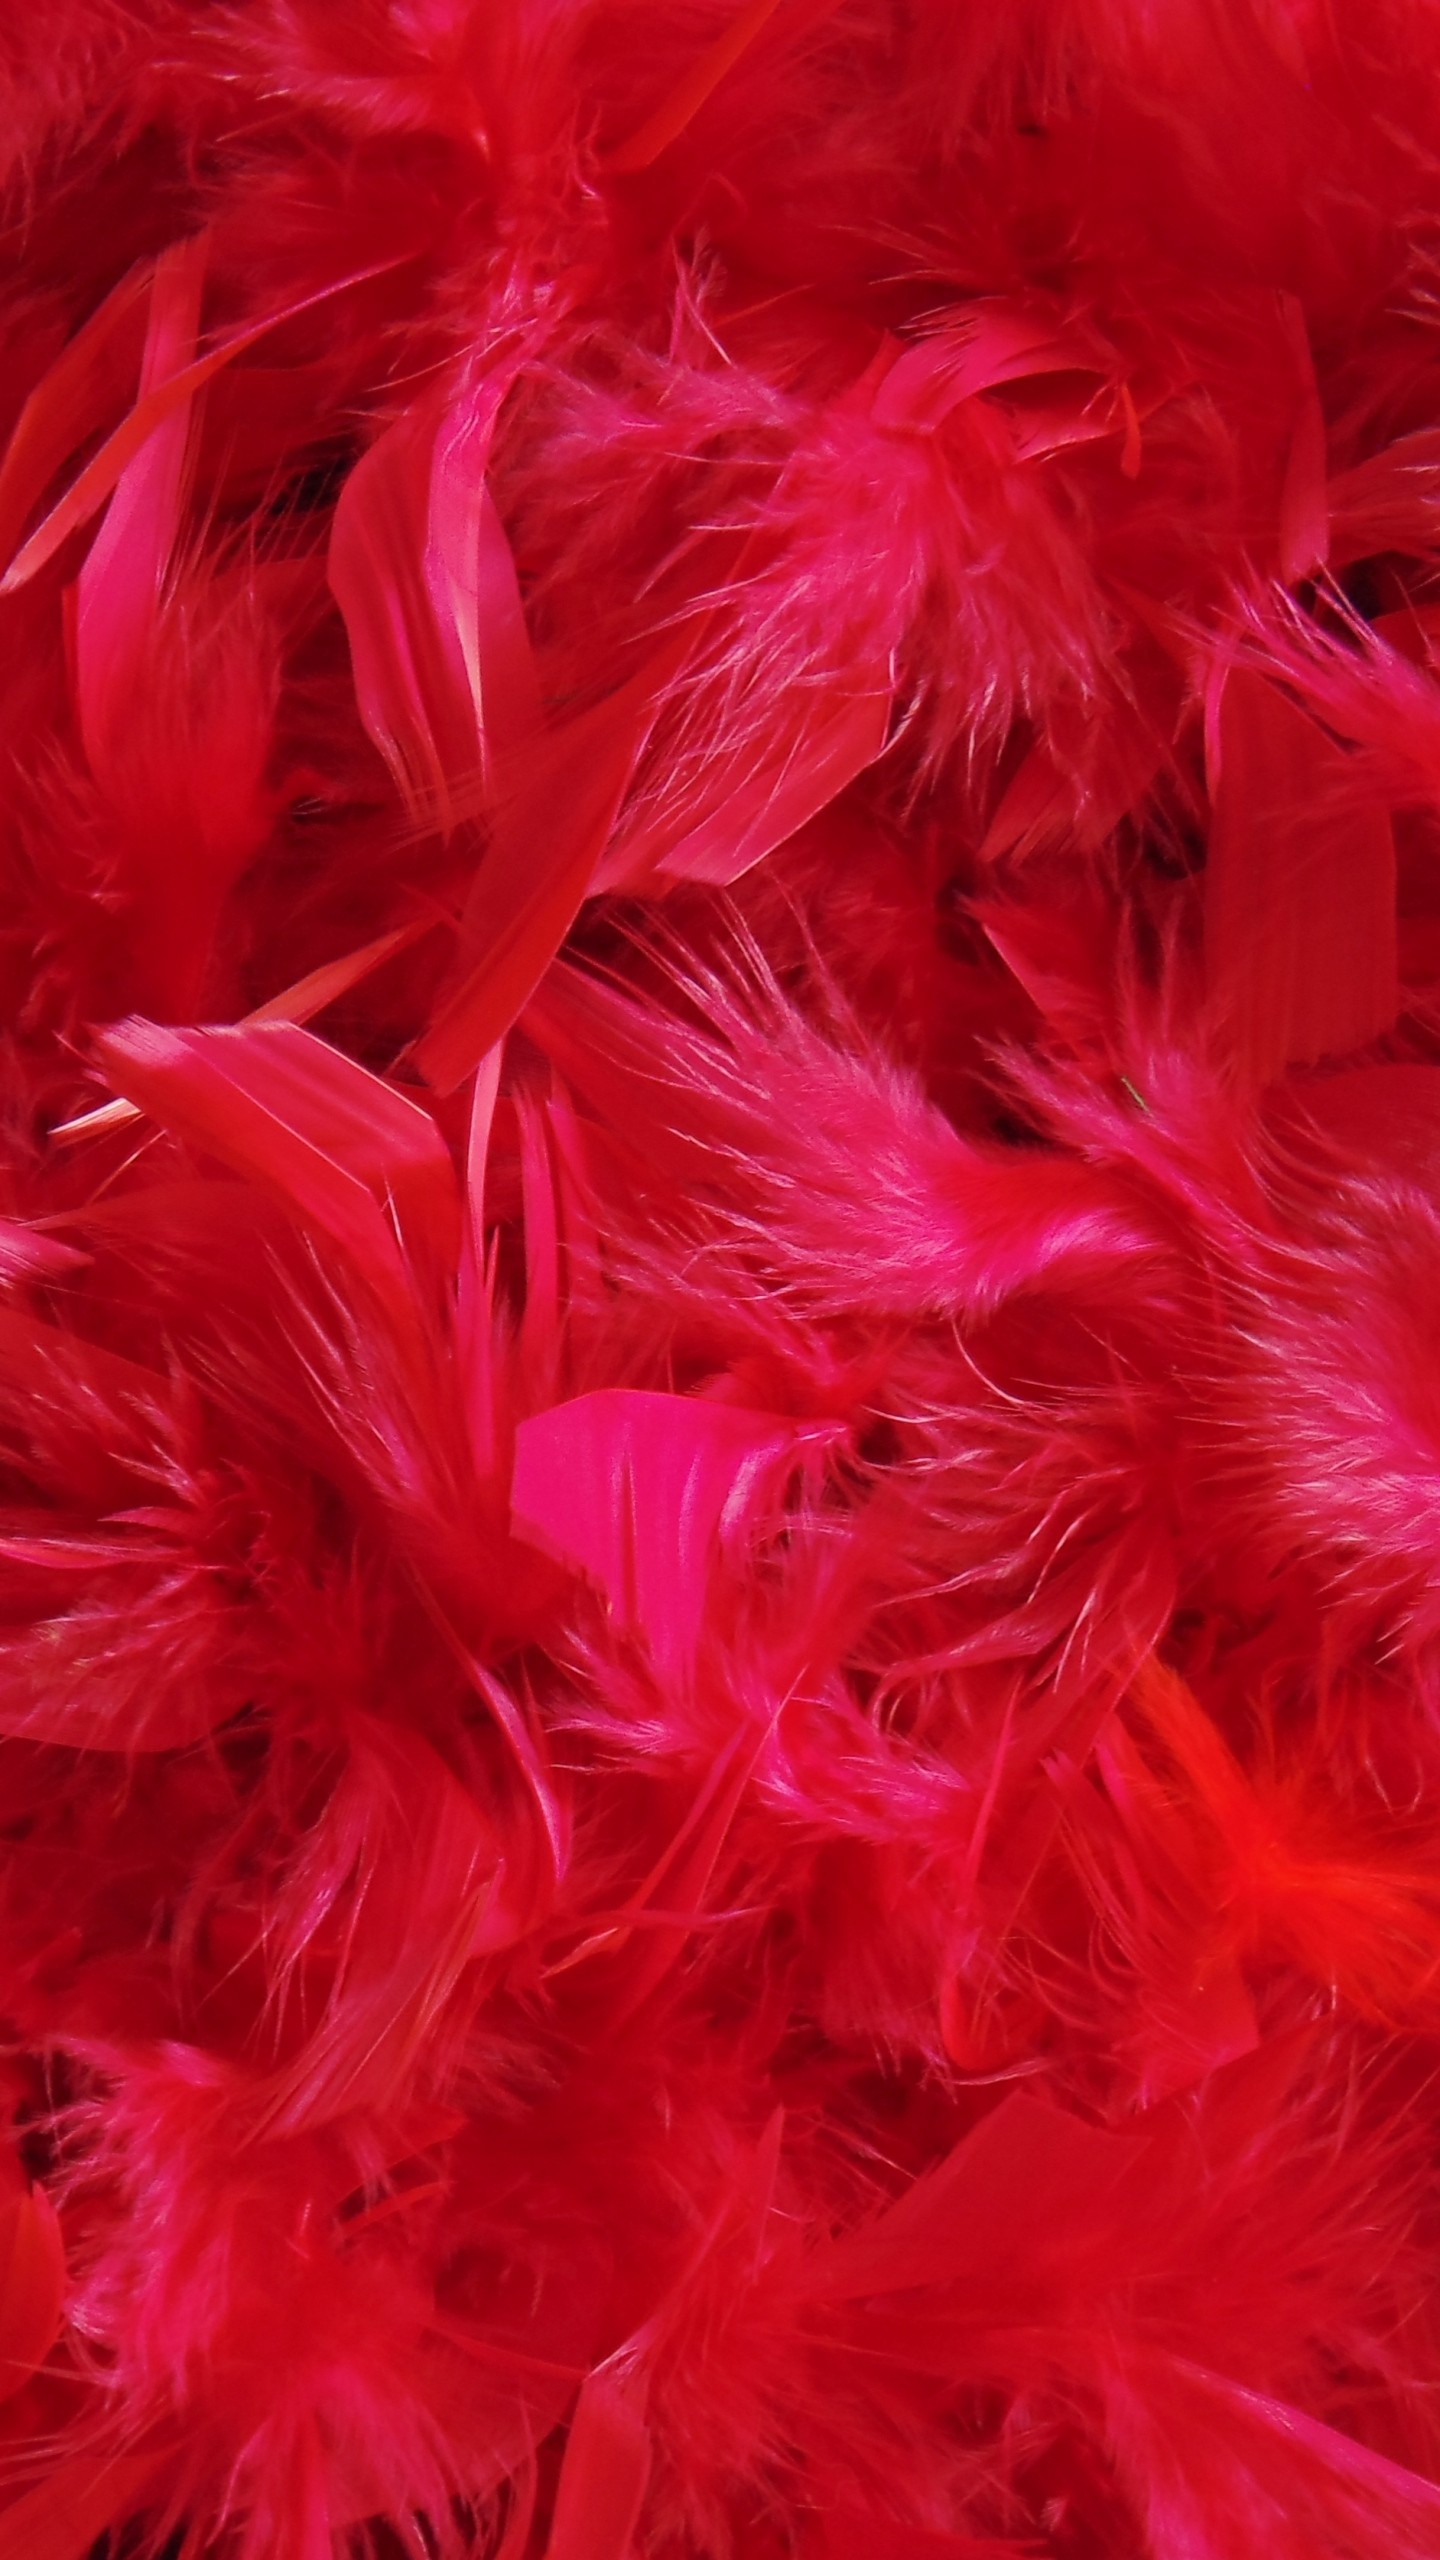 Feathers Down Red Wallpaper